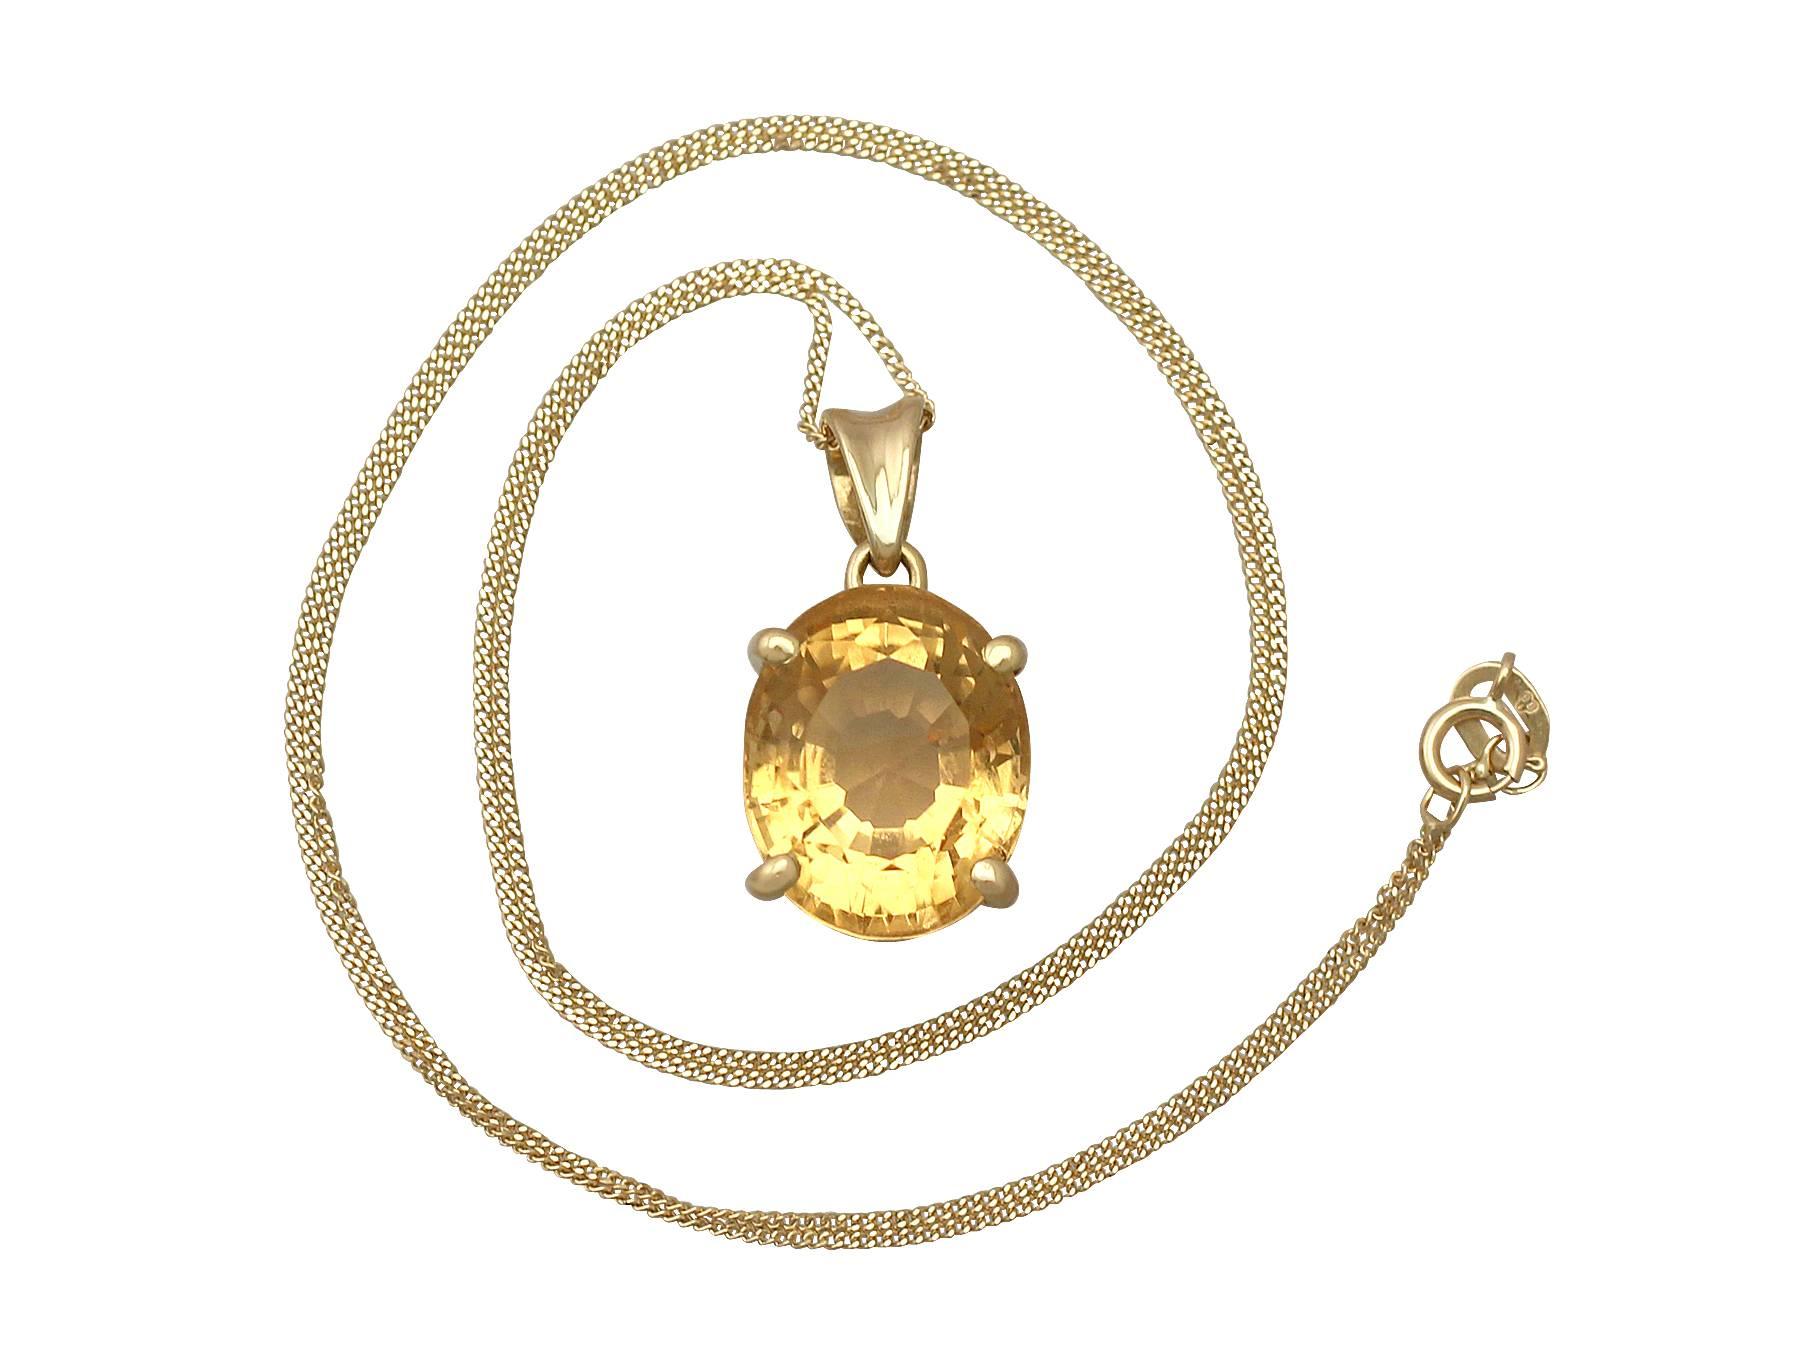 A fine and impressive 9.87 carat citrine and 18 carat yellow gold pendant; part of our diverse vintage jewellery and estate jewelry collections

This fine and impressive citrine pendant has been crafted in 18k yellow gold.

The pierced decorated